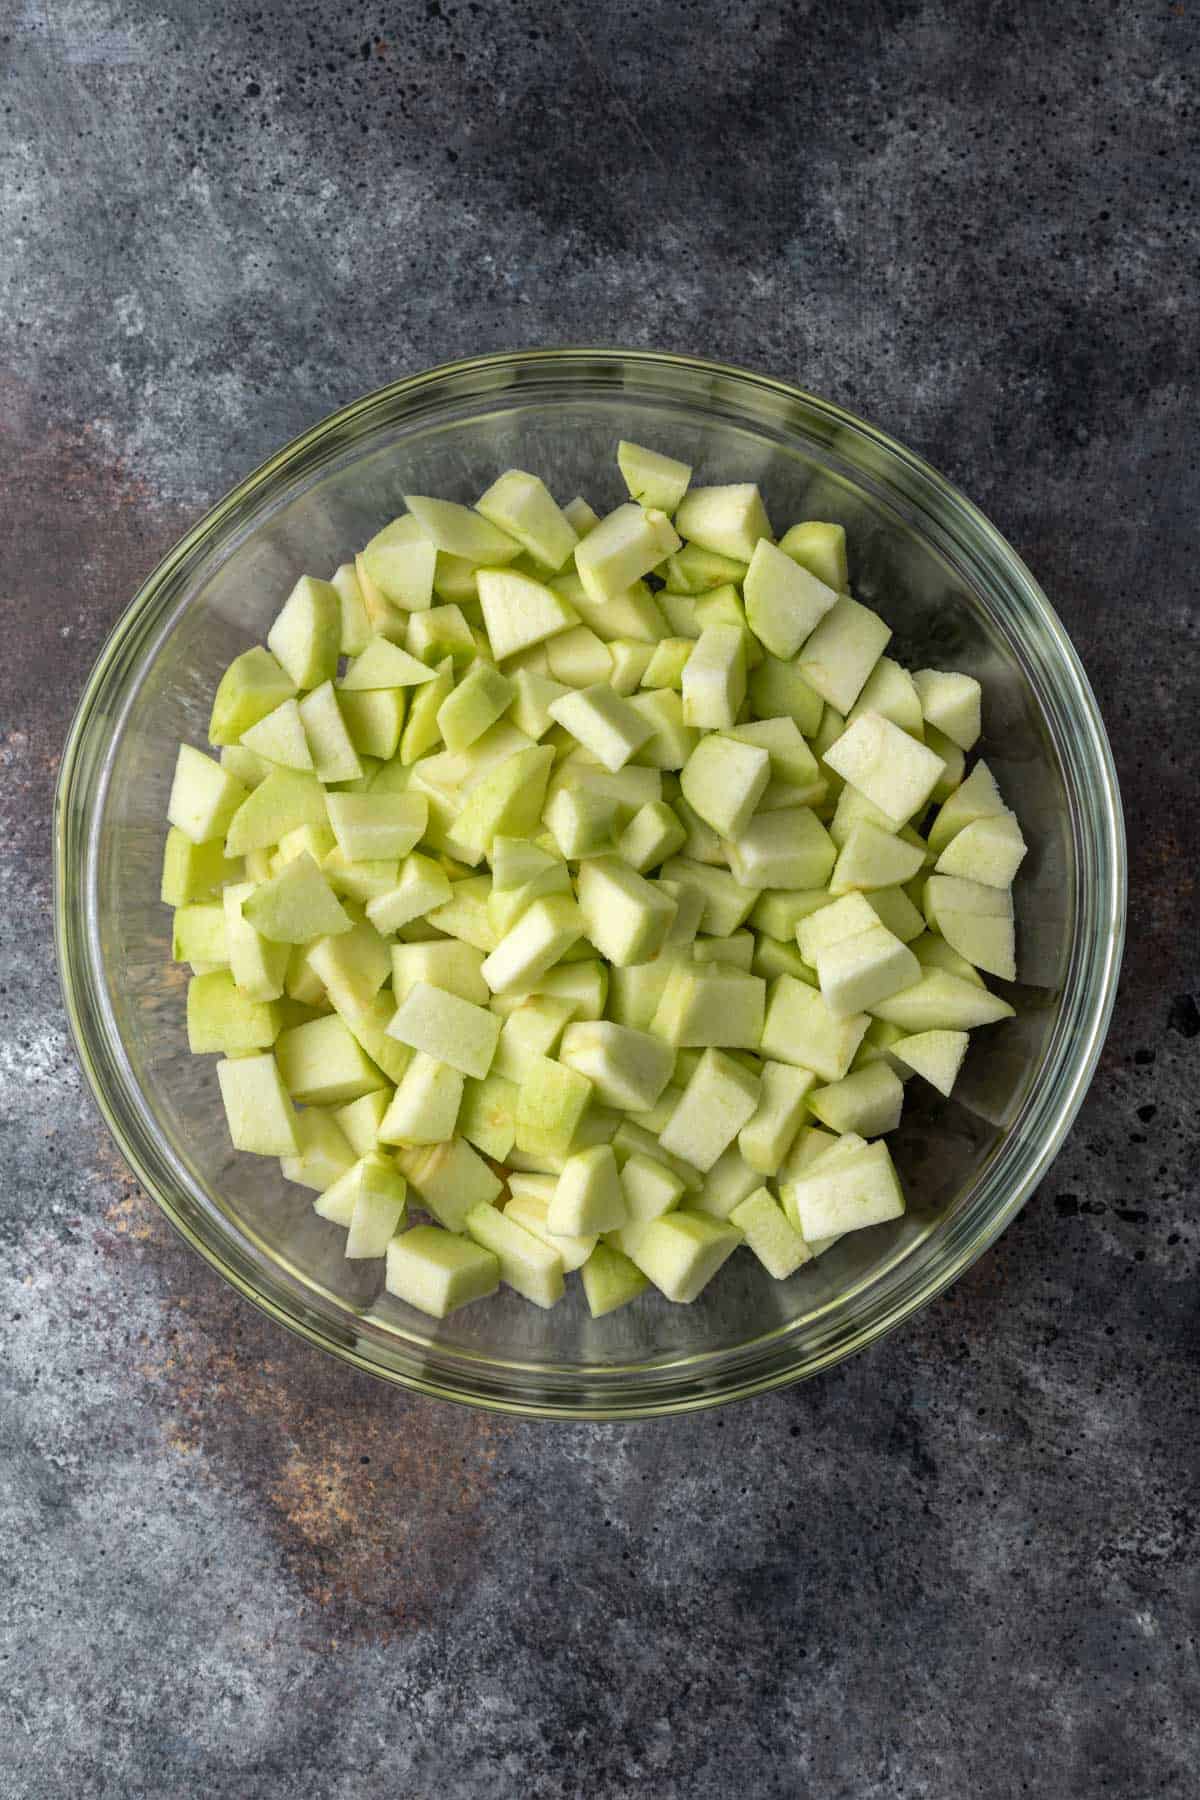 Diced apples in a large bowl.